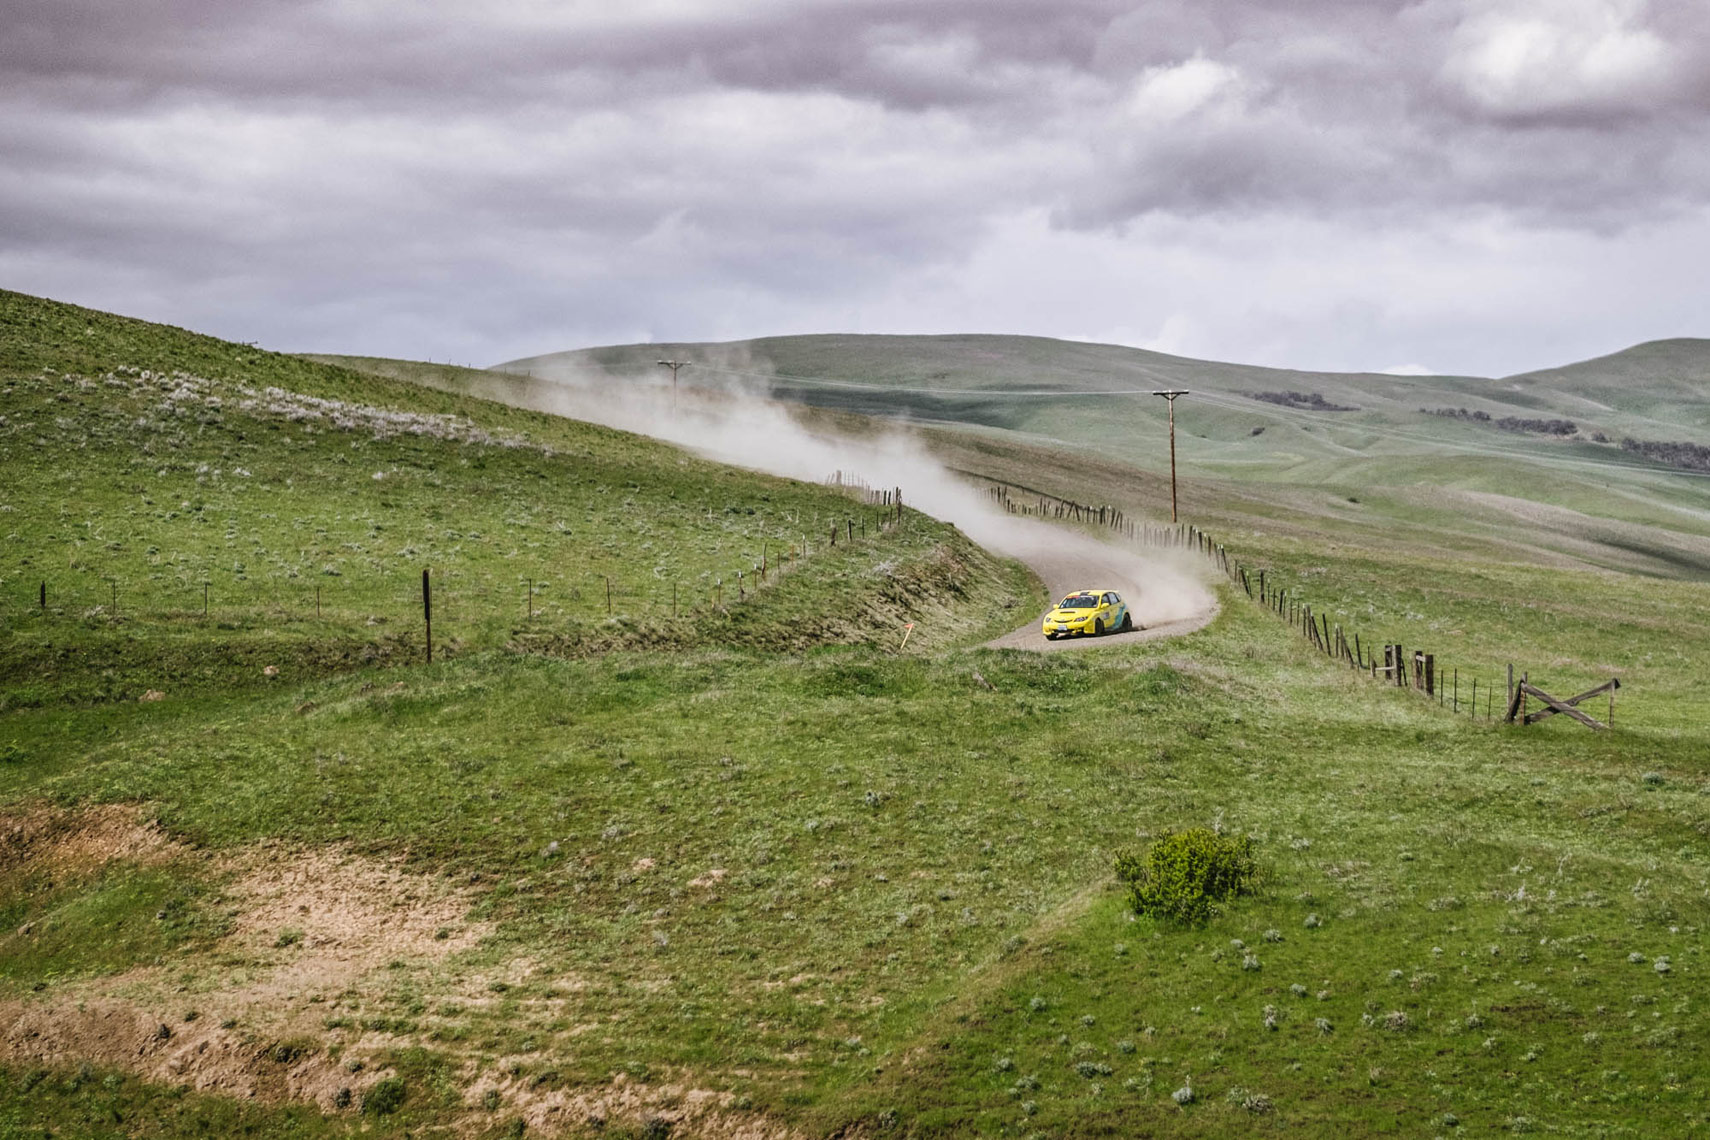 goldendale stage Oregon trail rally on a cloudy day